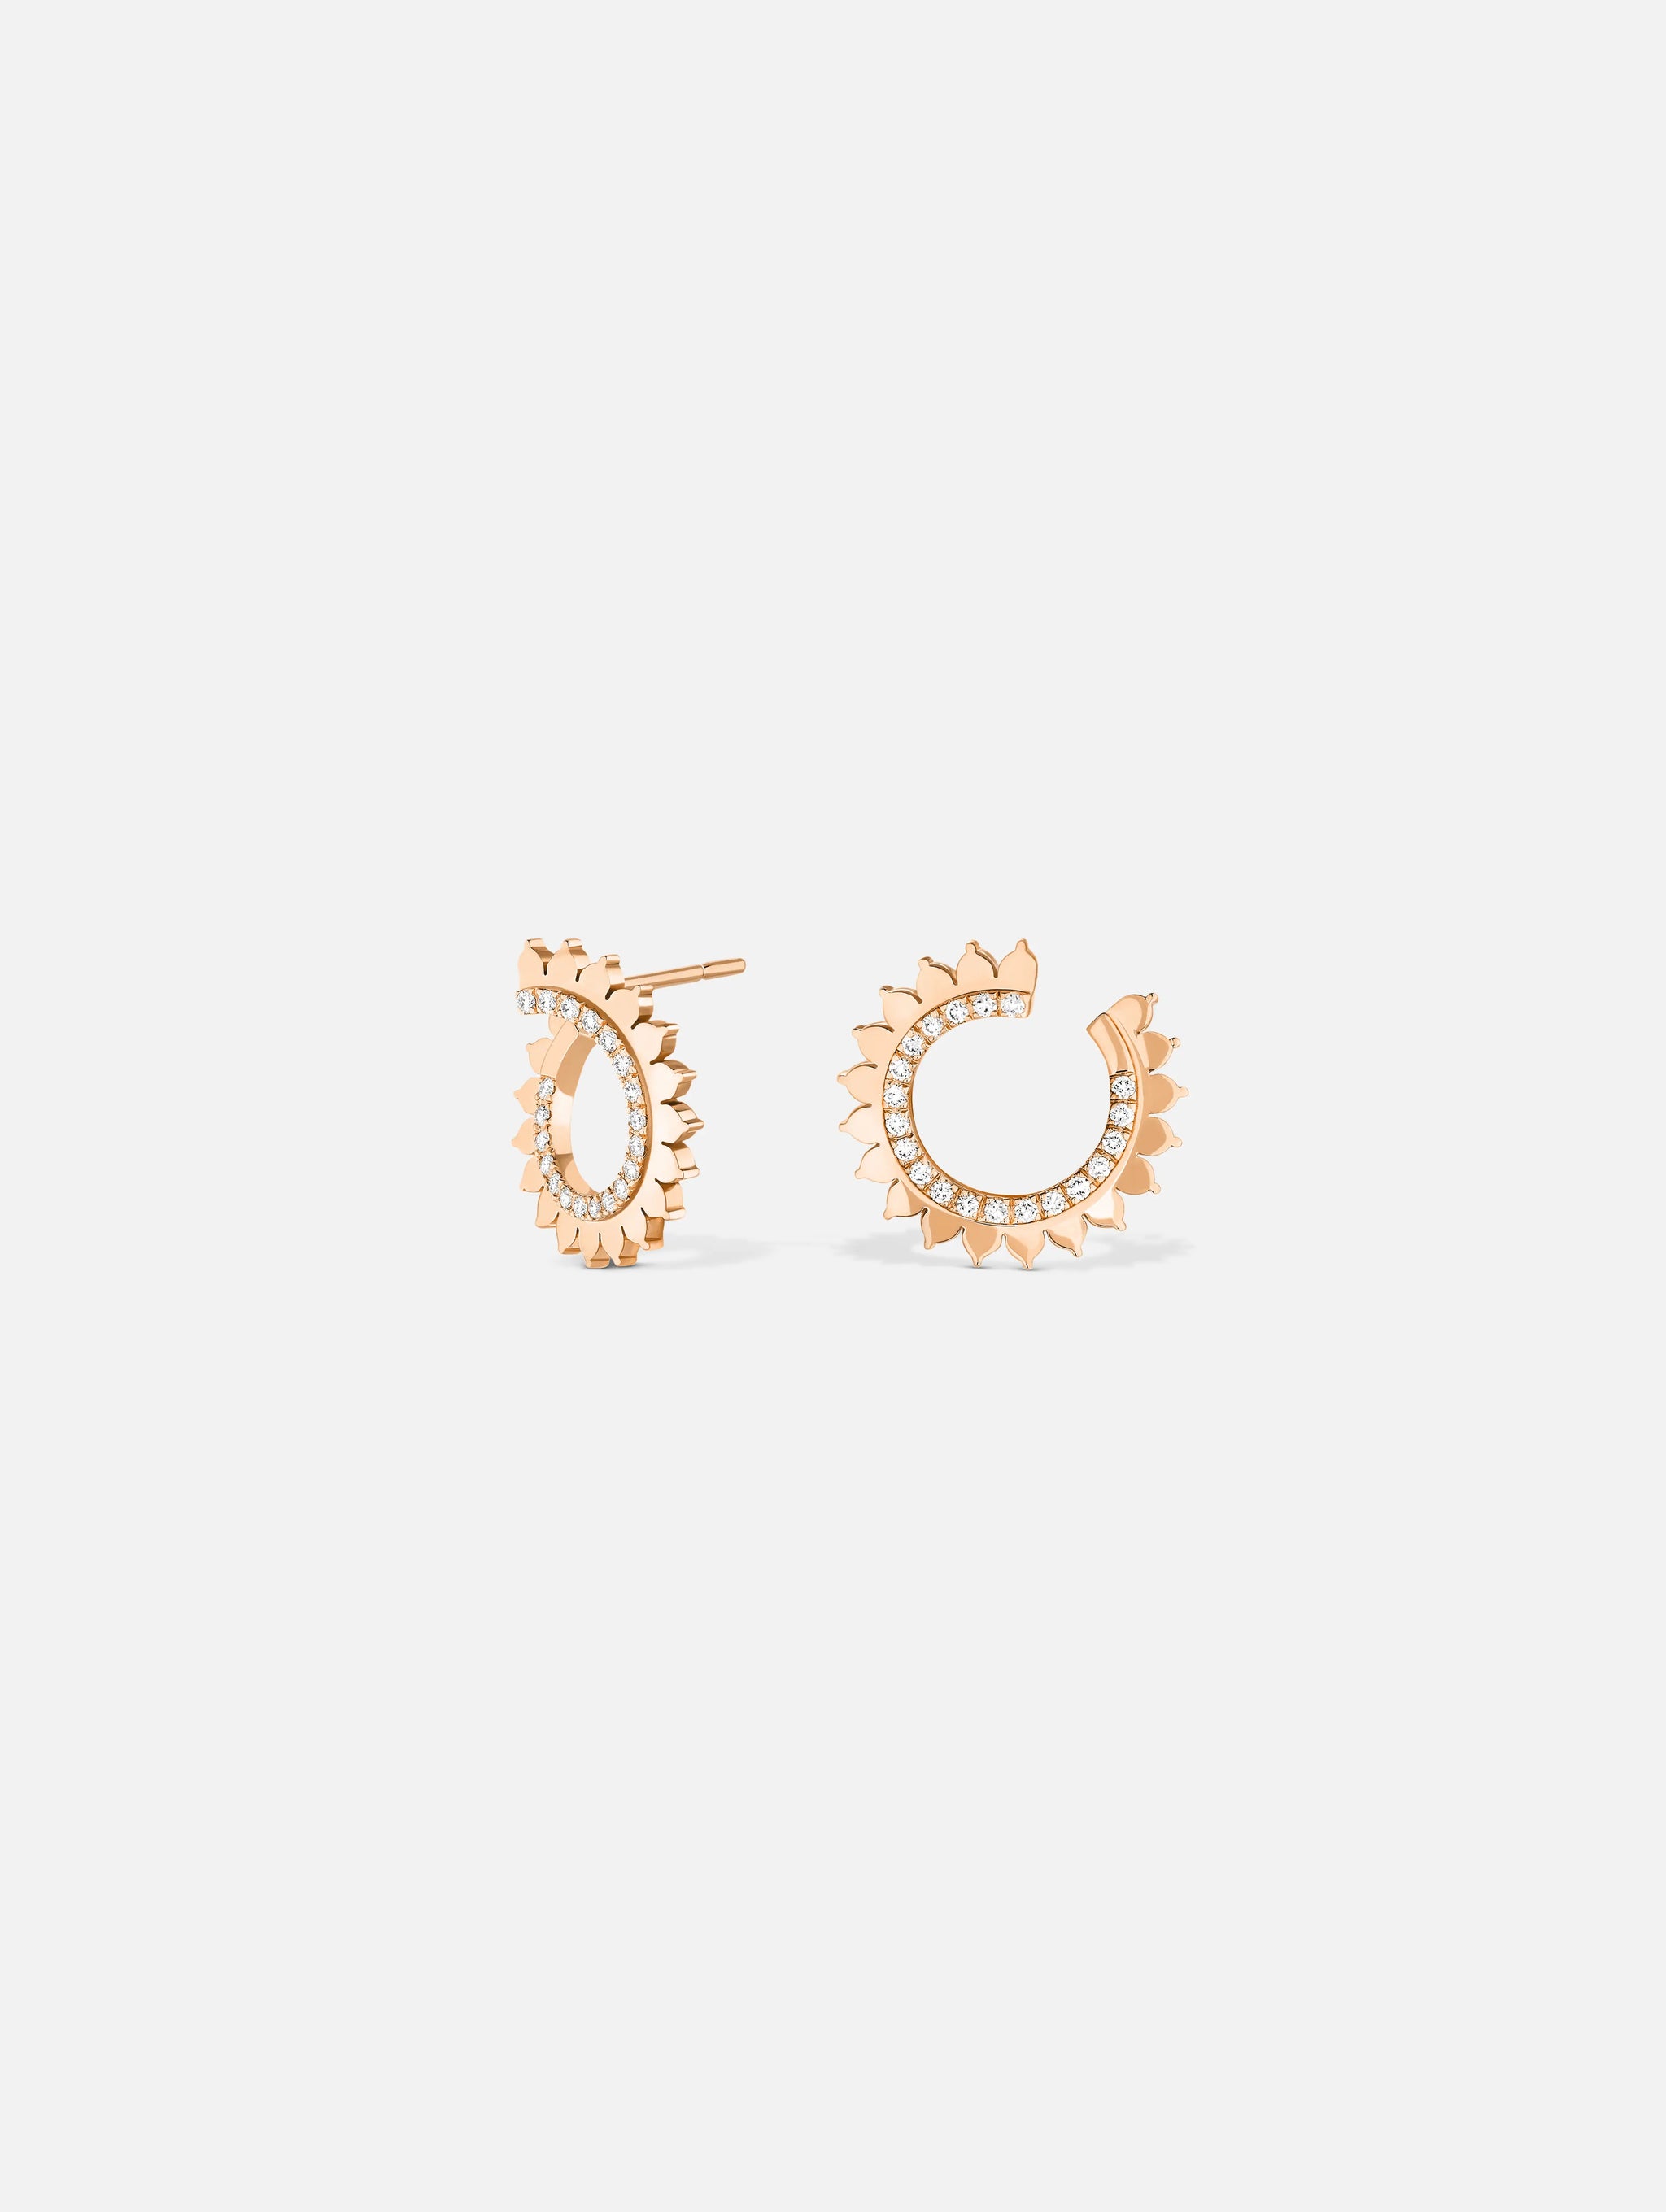 Rose Gold Earrings - 1 - Nouvel Heritage